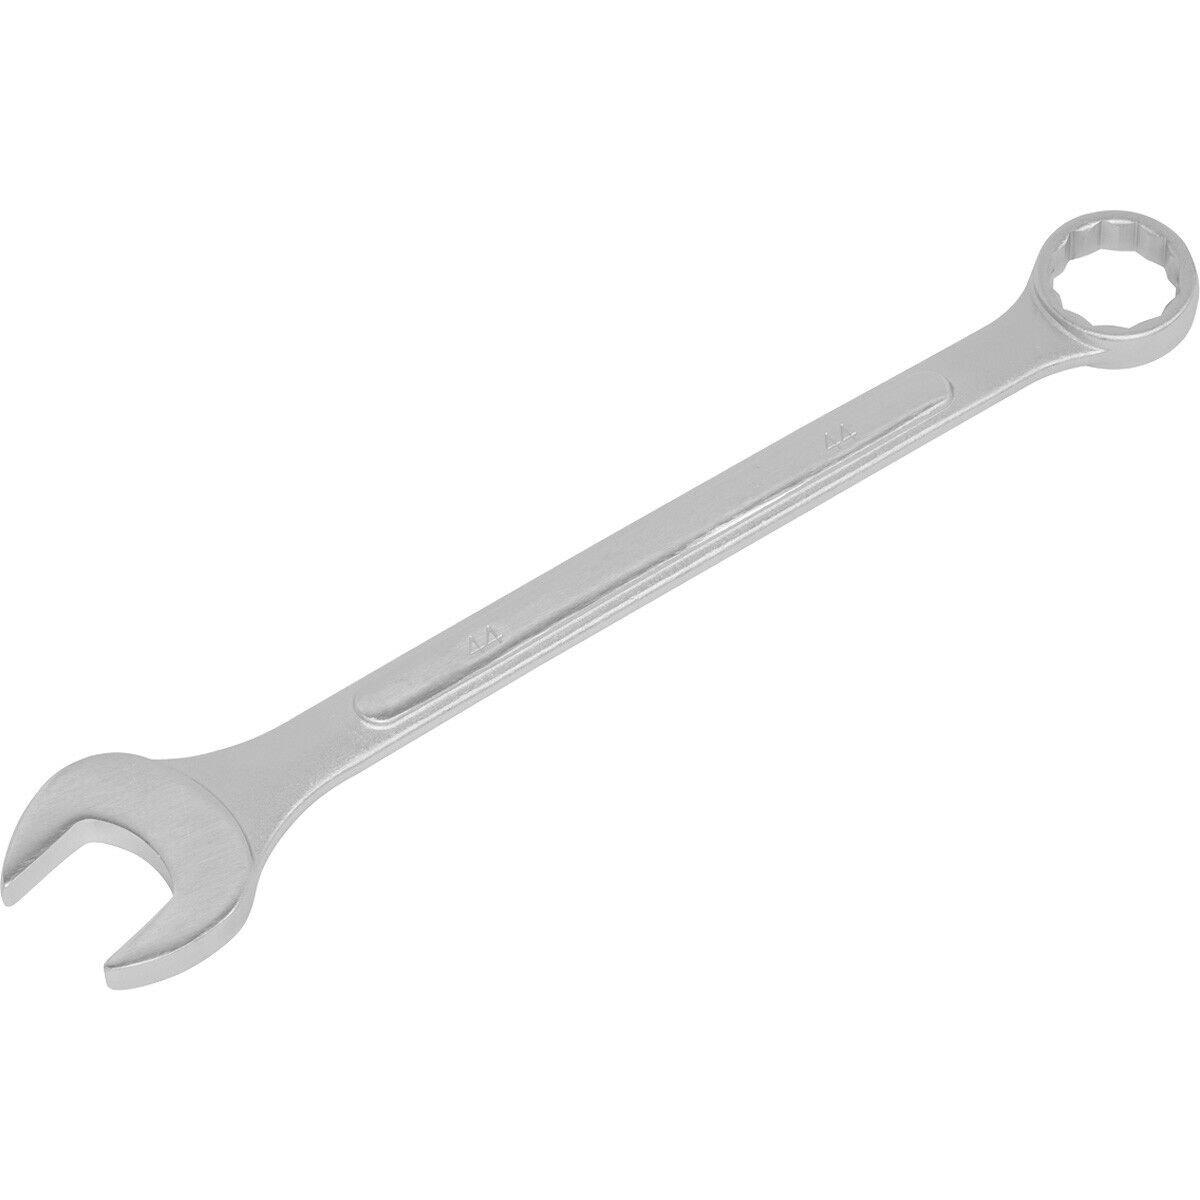 44mm Large Combination Spanner - Drop Forged Steel - Chrome Plated Polished Jaws